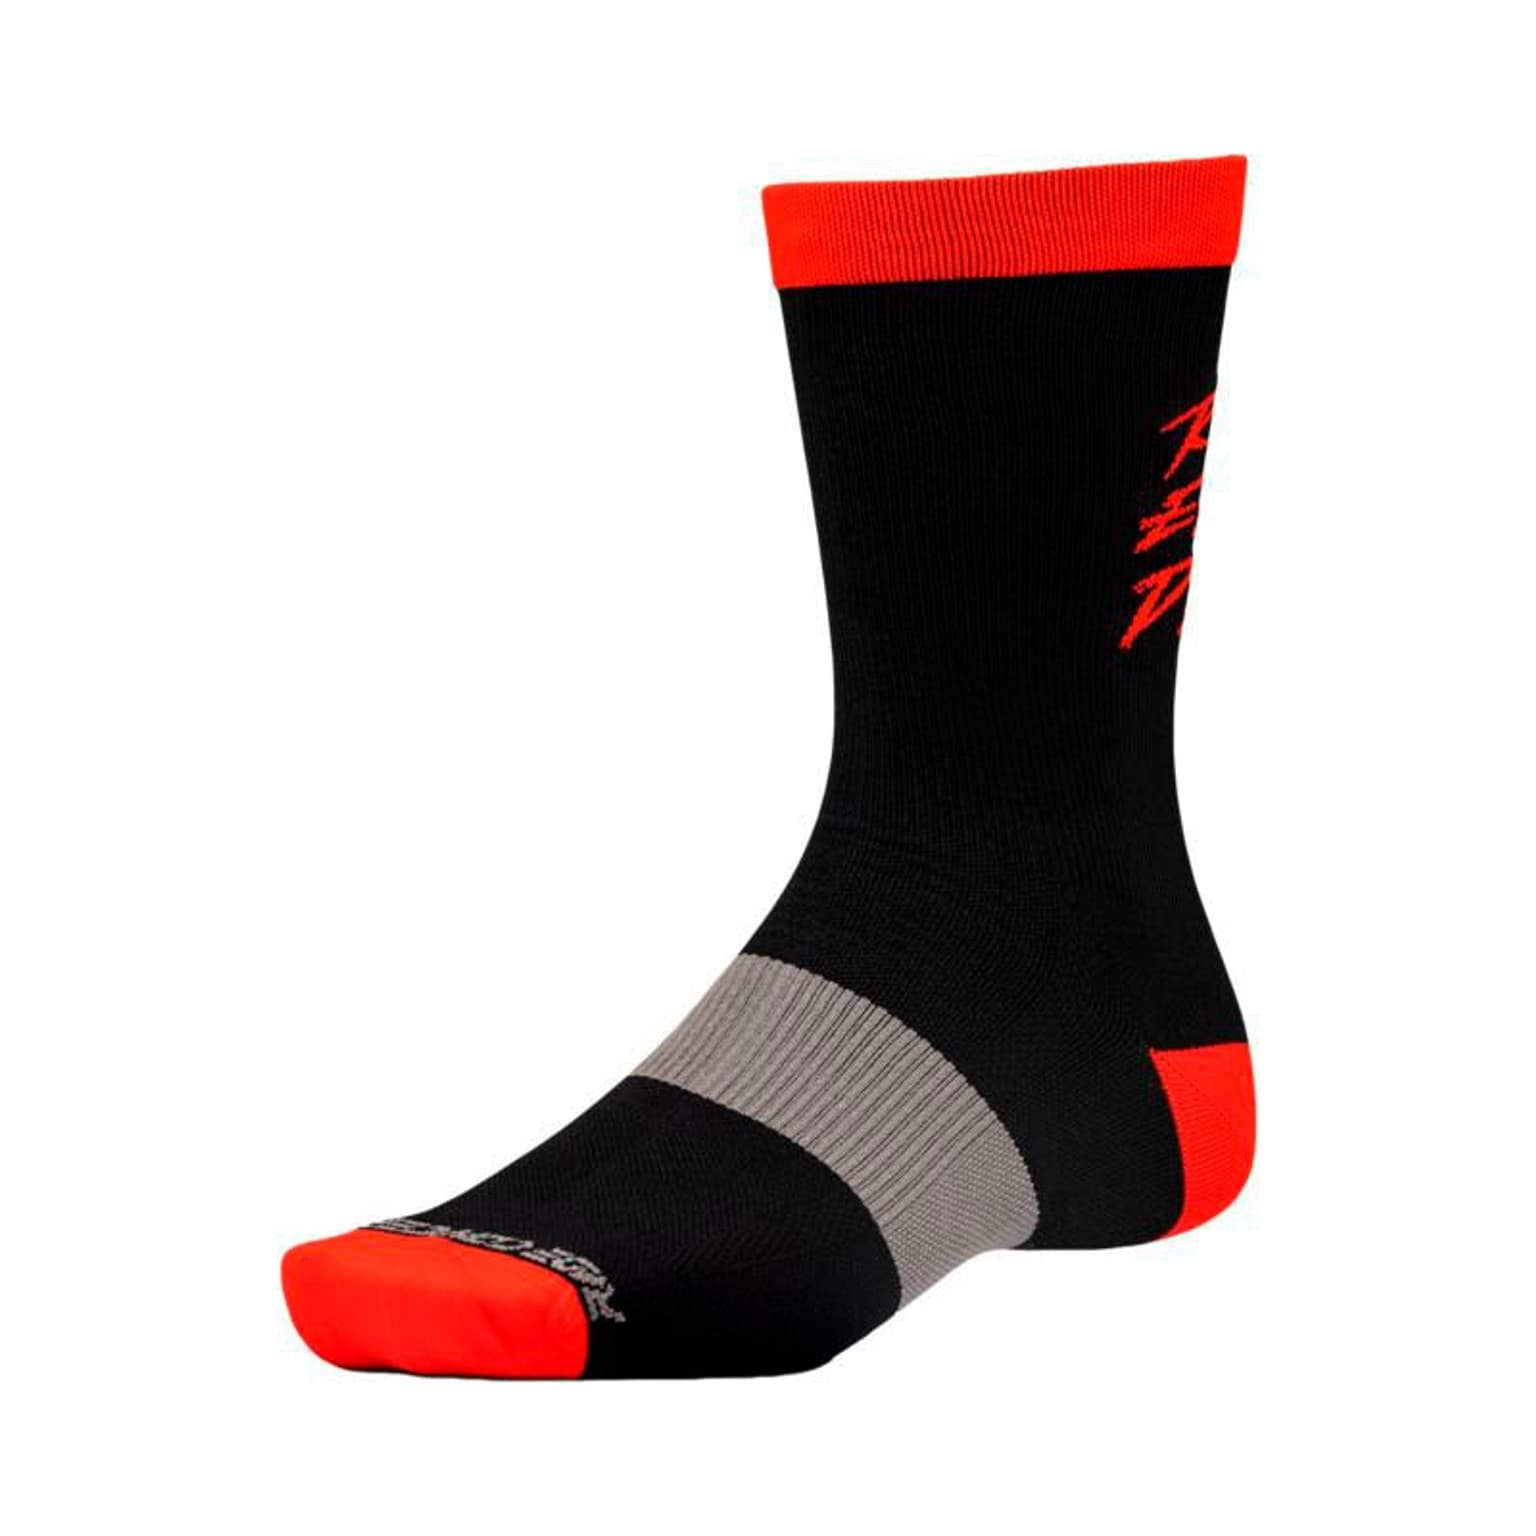 Ride Concepts Ride Concepts Ride Every Day Synthetic Velosocken rosso 2